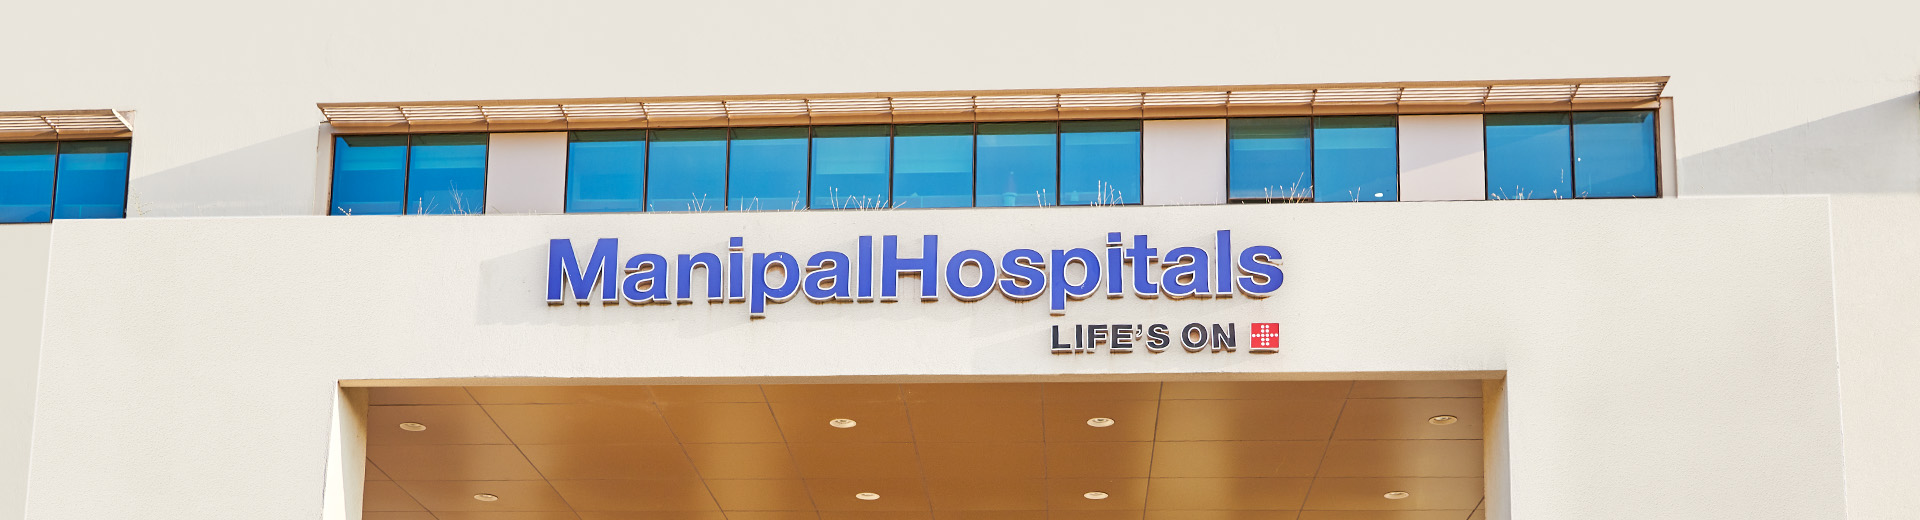 Best Multispeciality Hospital in Delhi | Manipal Hospitals